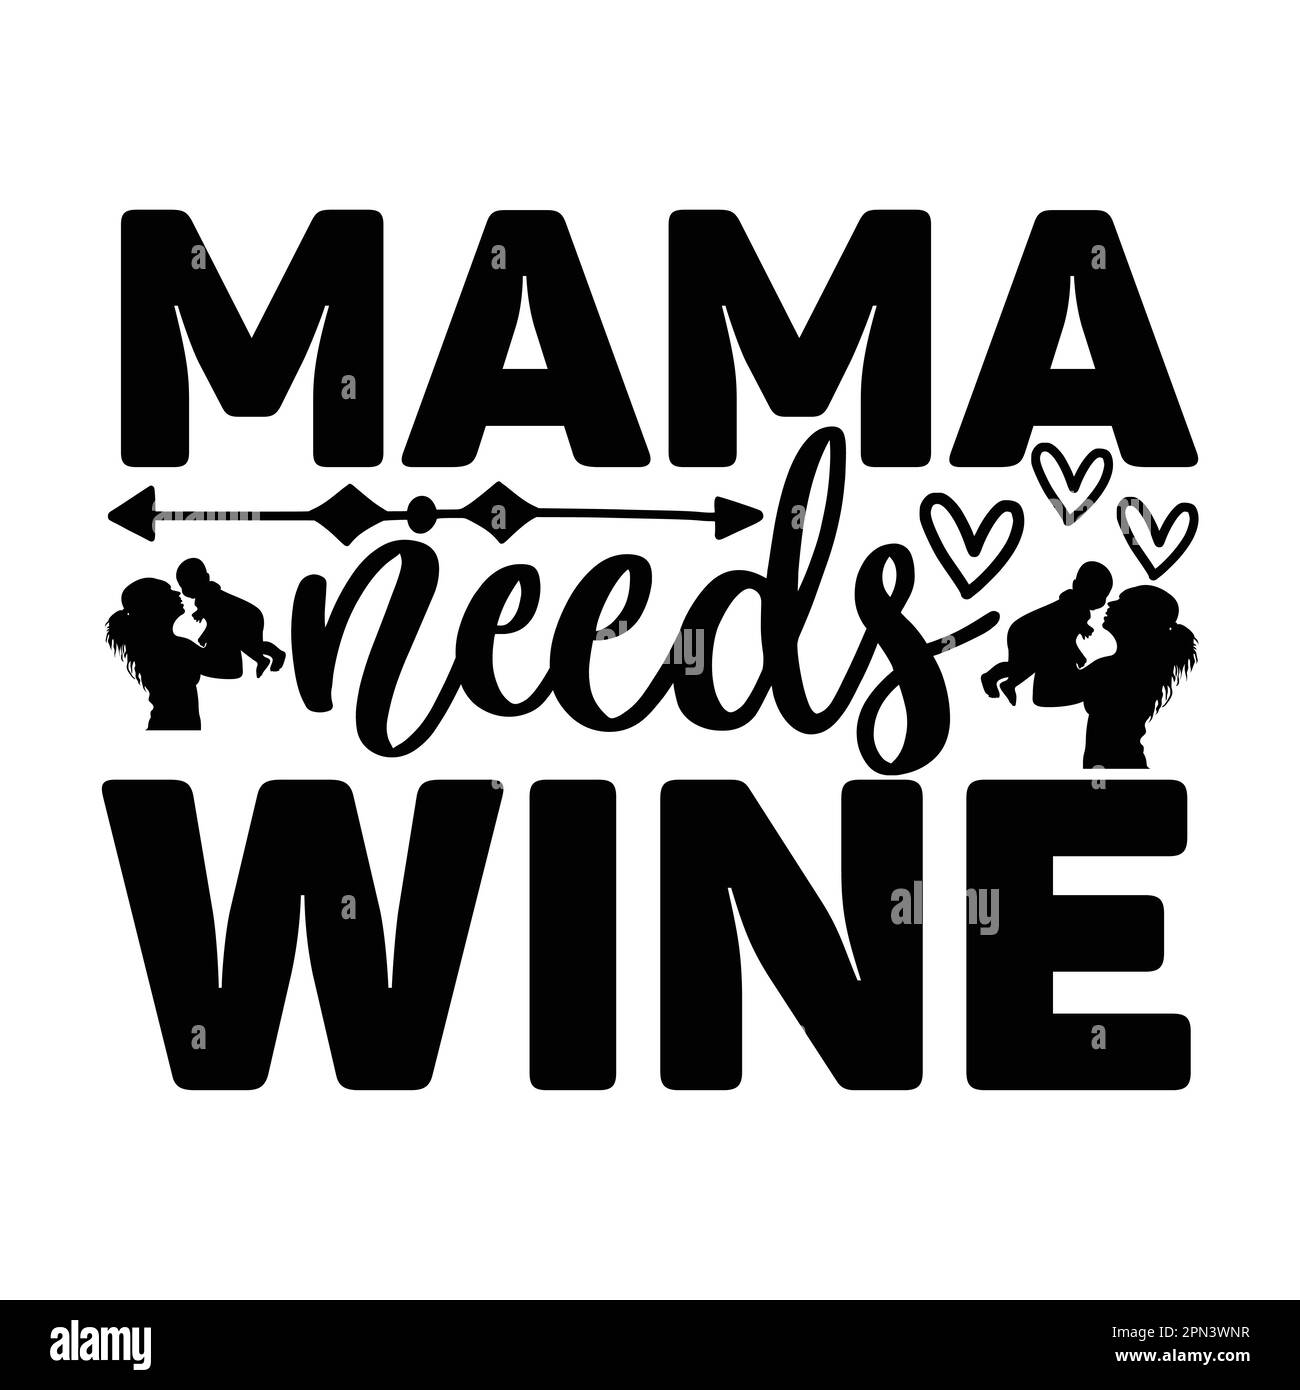 Mama Needs Wine, Mother's Day typography shirt design for mother lover mom mommy mama Handmade calligraphy vector illustration Silhouette Stock Vector